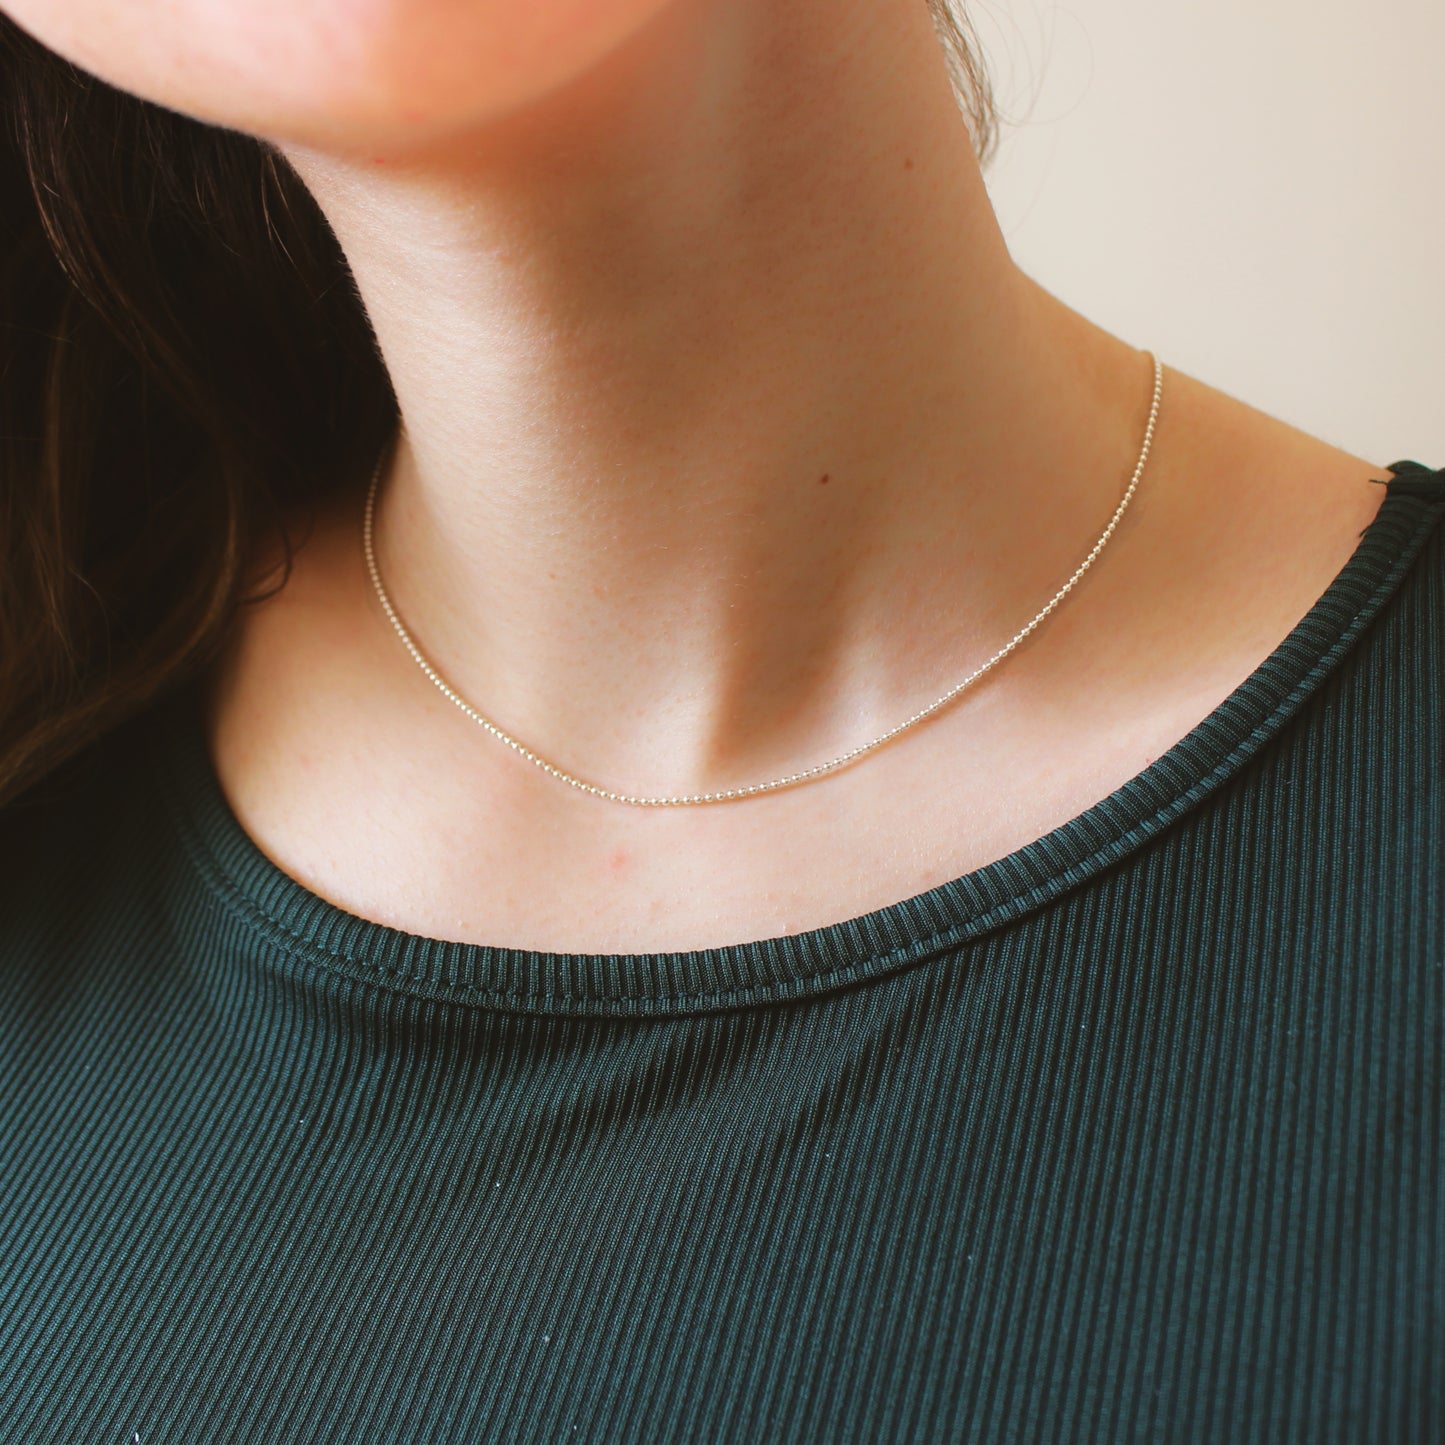 925 sterling silver necklace 9 styles | Dainty minimalist chain | Choker necklace